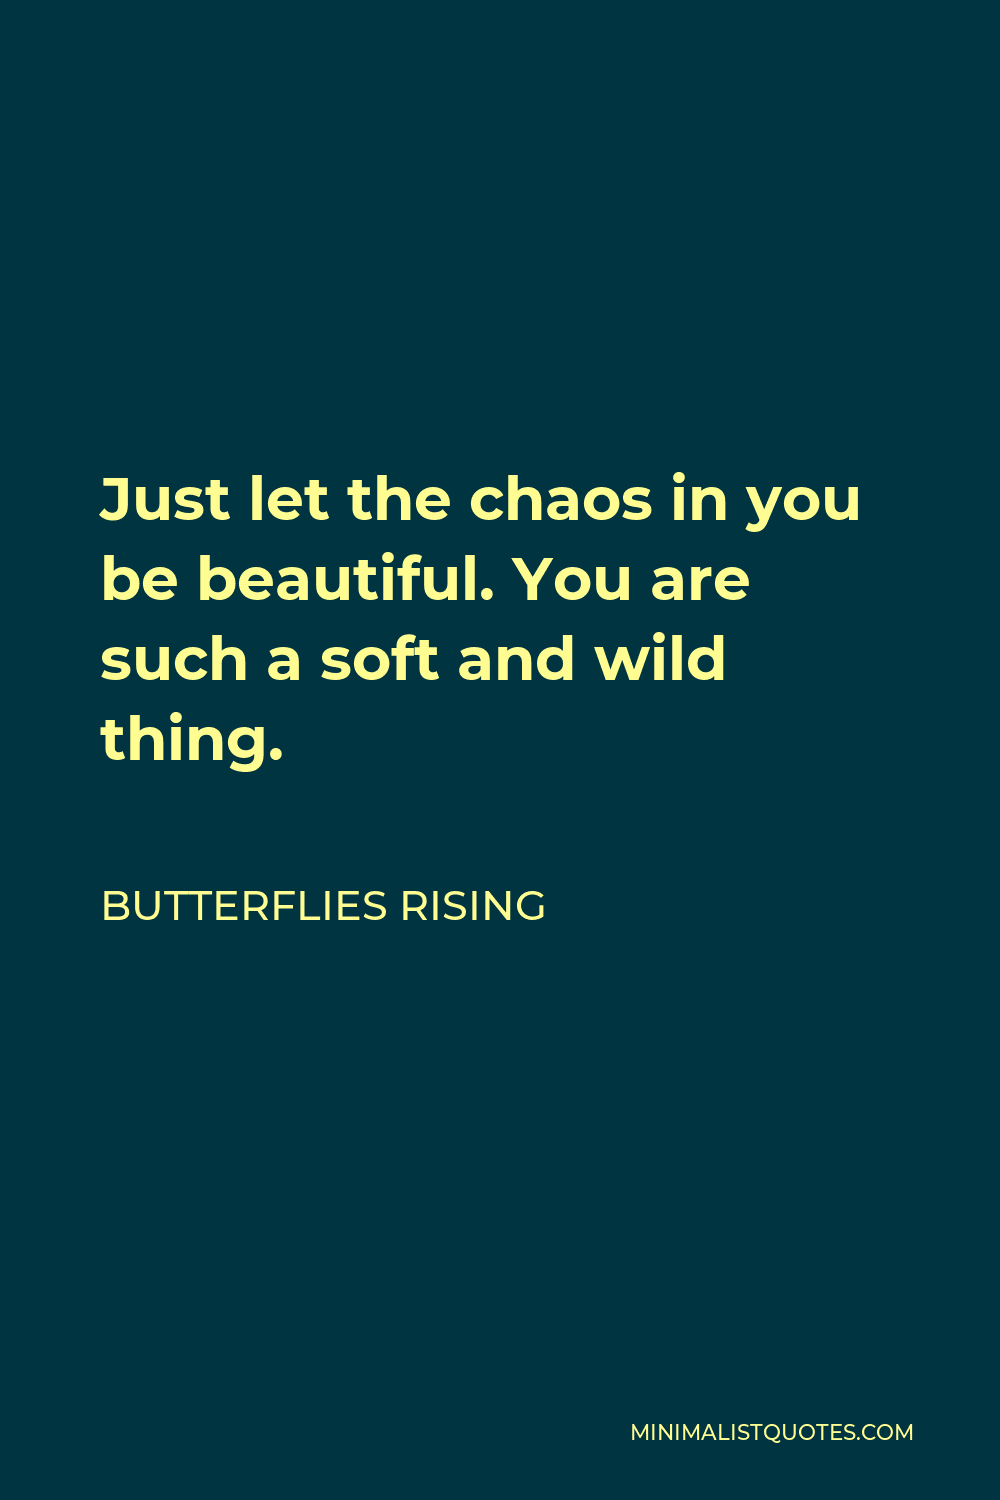 Butterflies Rising Quote - Just let the chaos in you be beautiful. You are such a soft and wild thing.